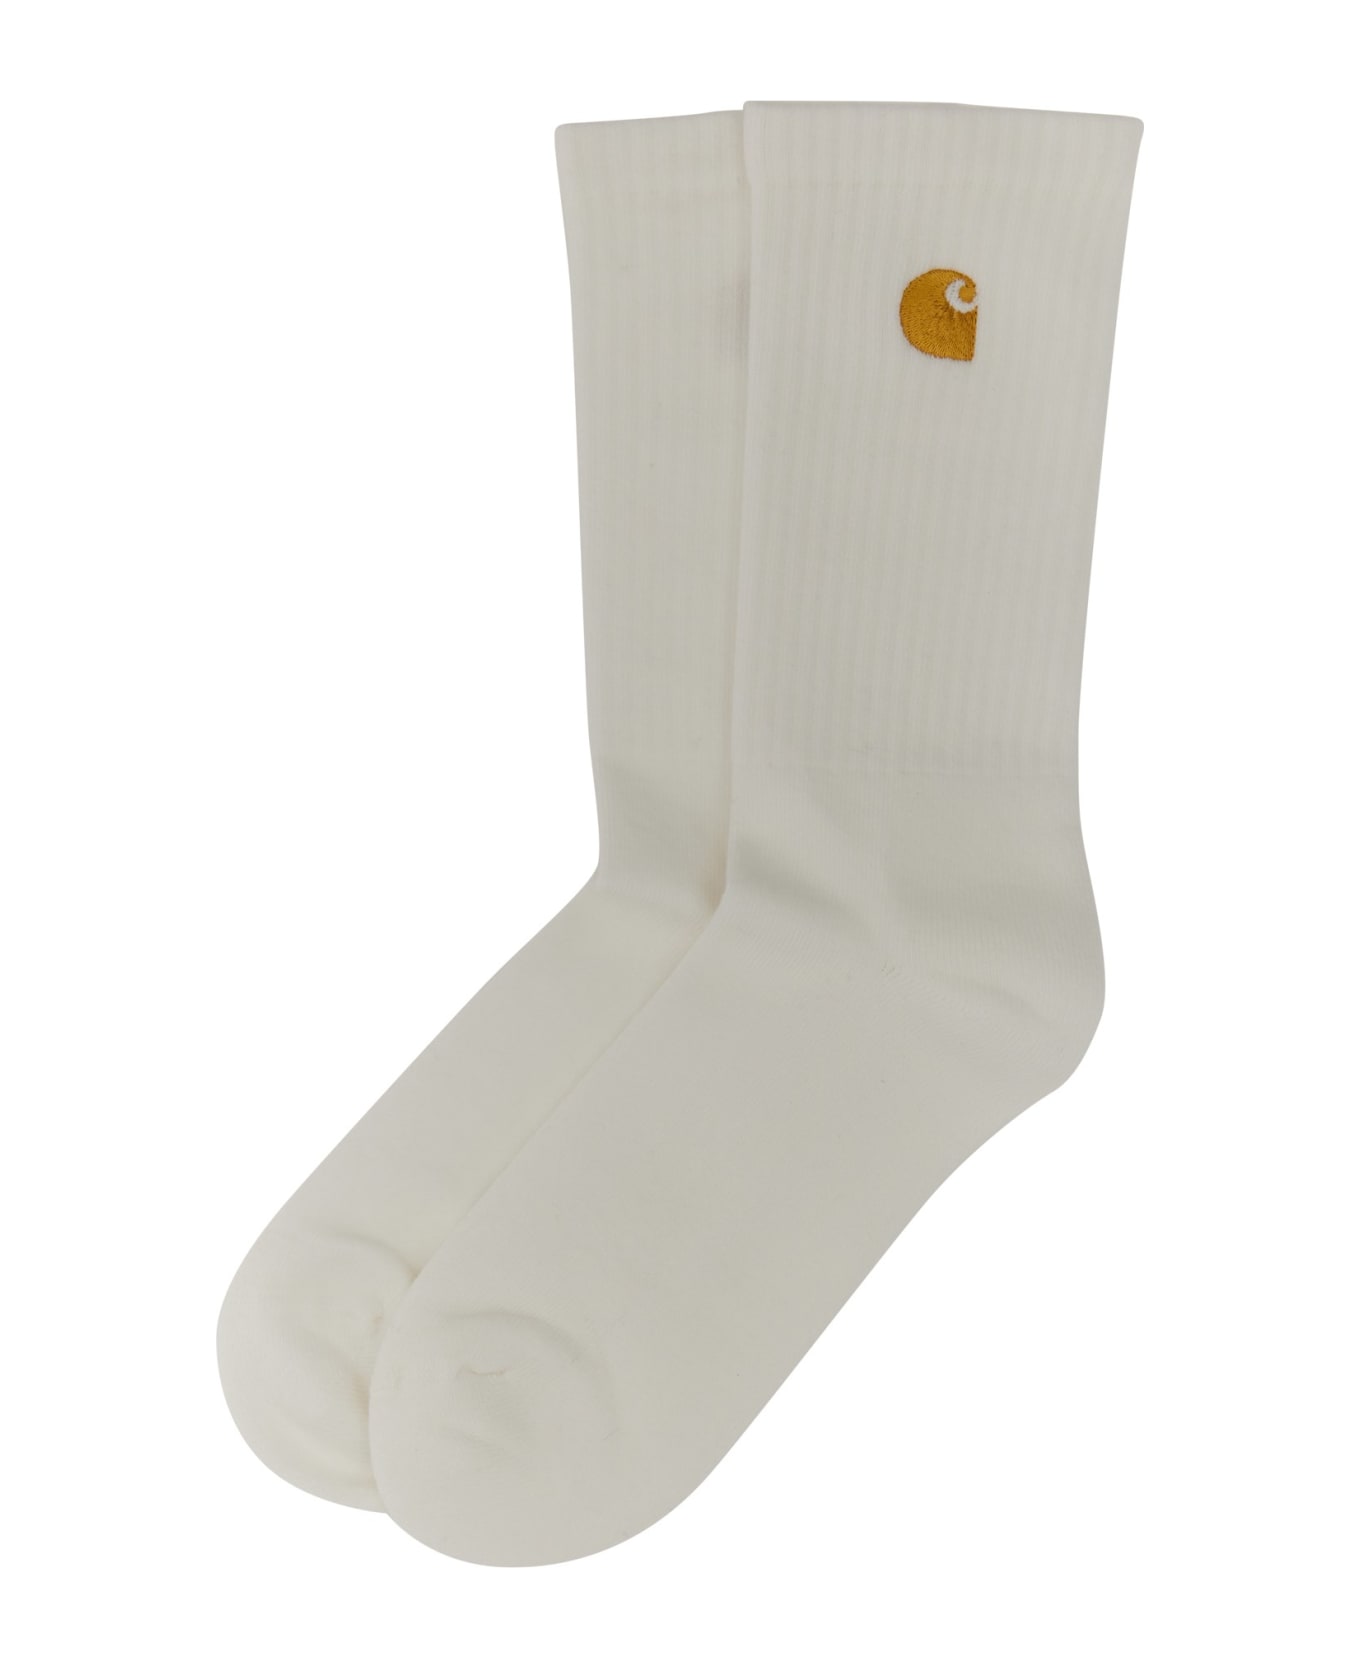 Carhartt Socks With Logo Embroidery - White